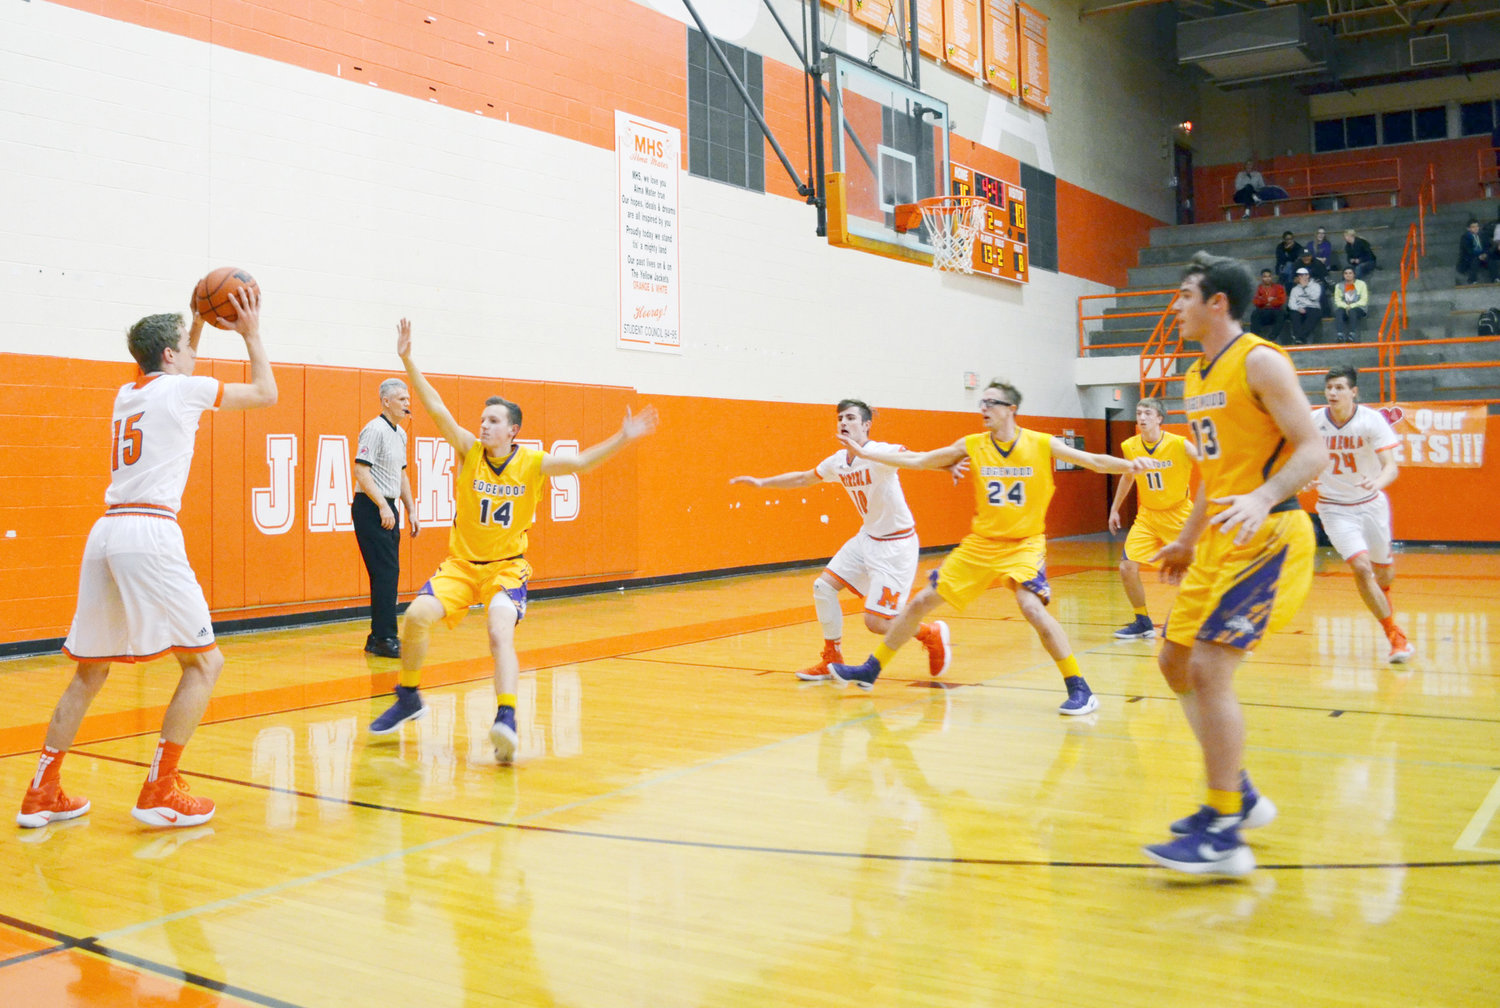 Cameron Sorenson (15) looks to pass against the Edgewood defense in Mineola’s 49-43 victory over the Bulldogs Friday night. (Photo by Evan Dudley)